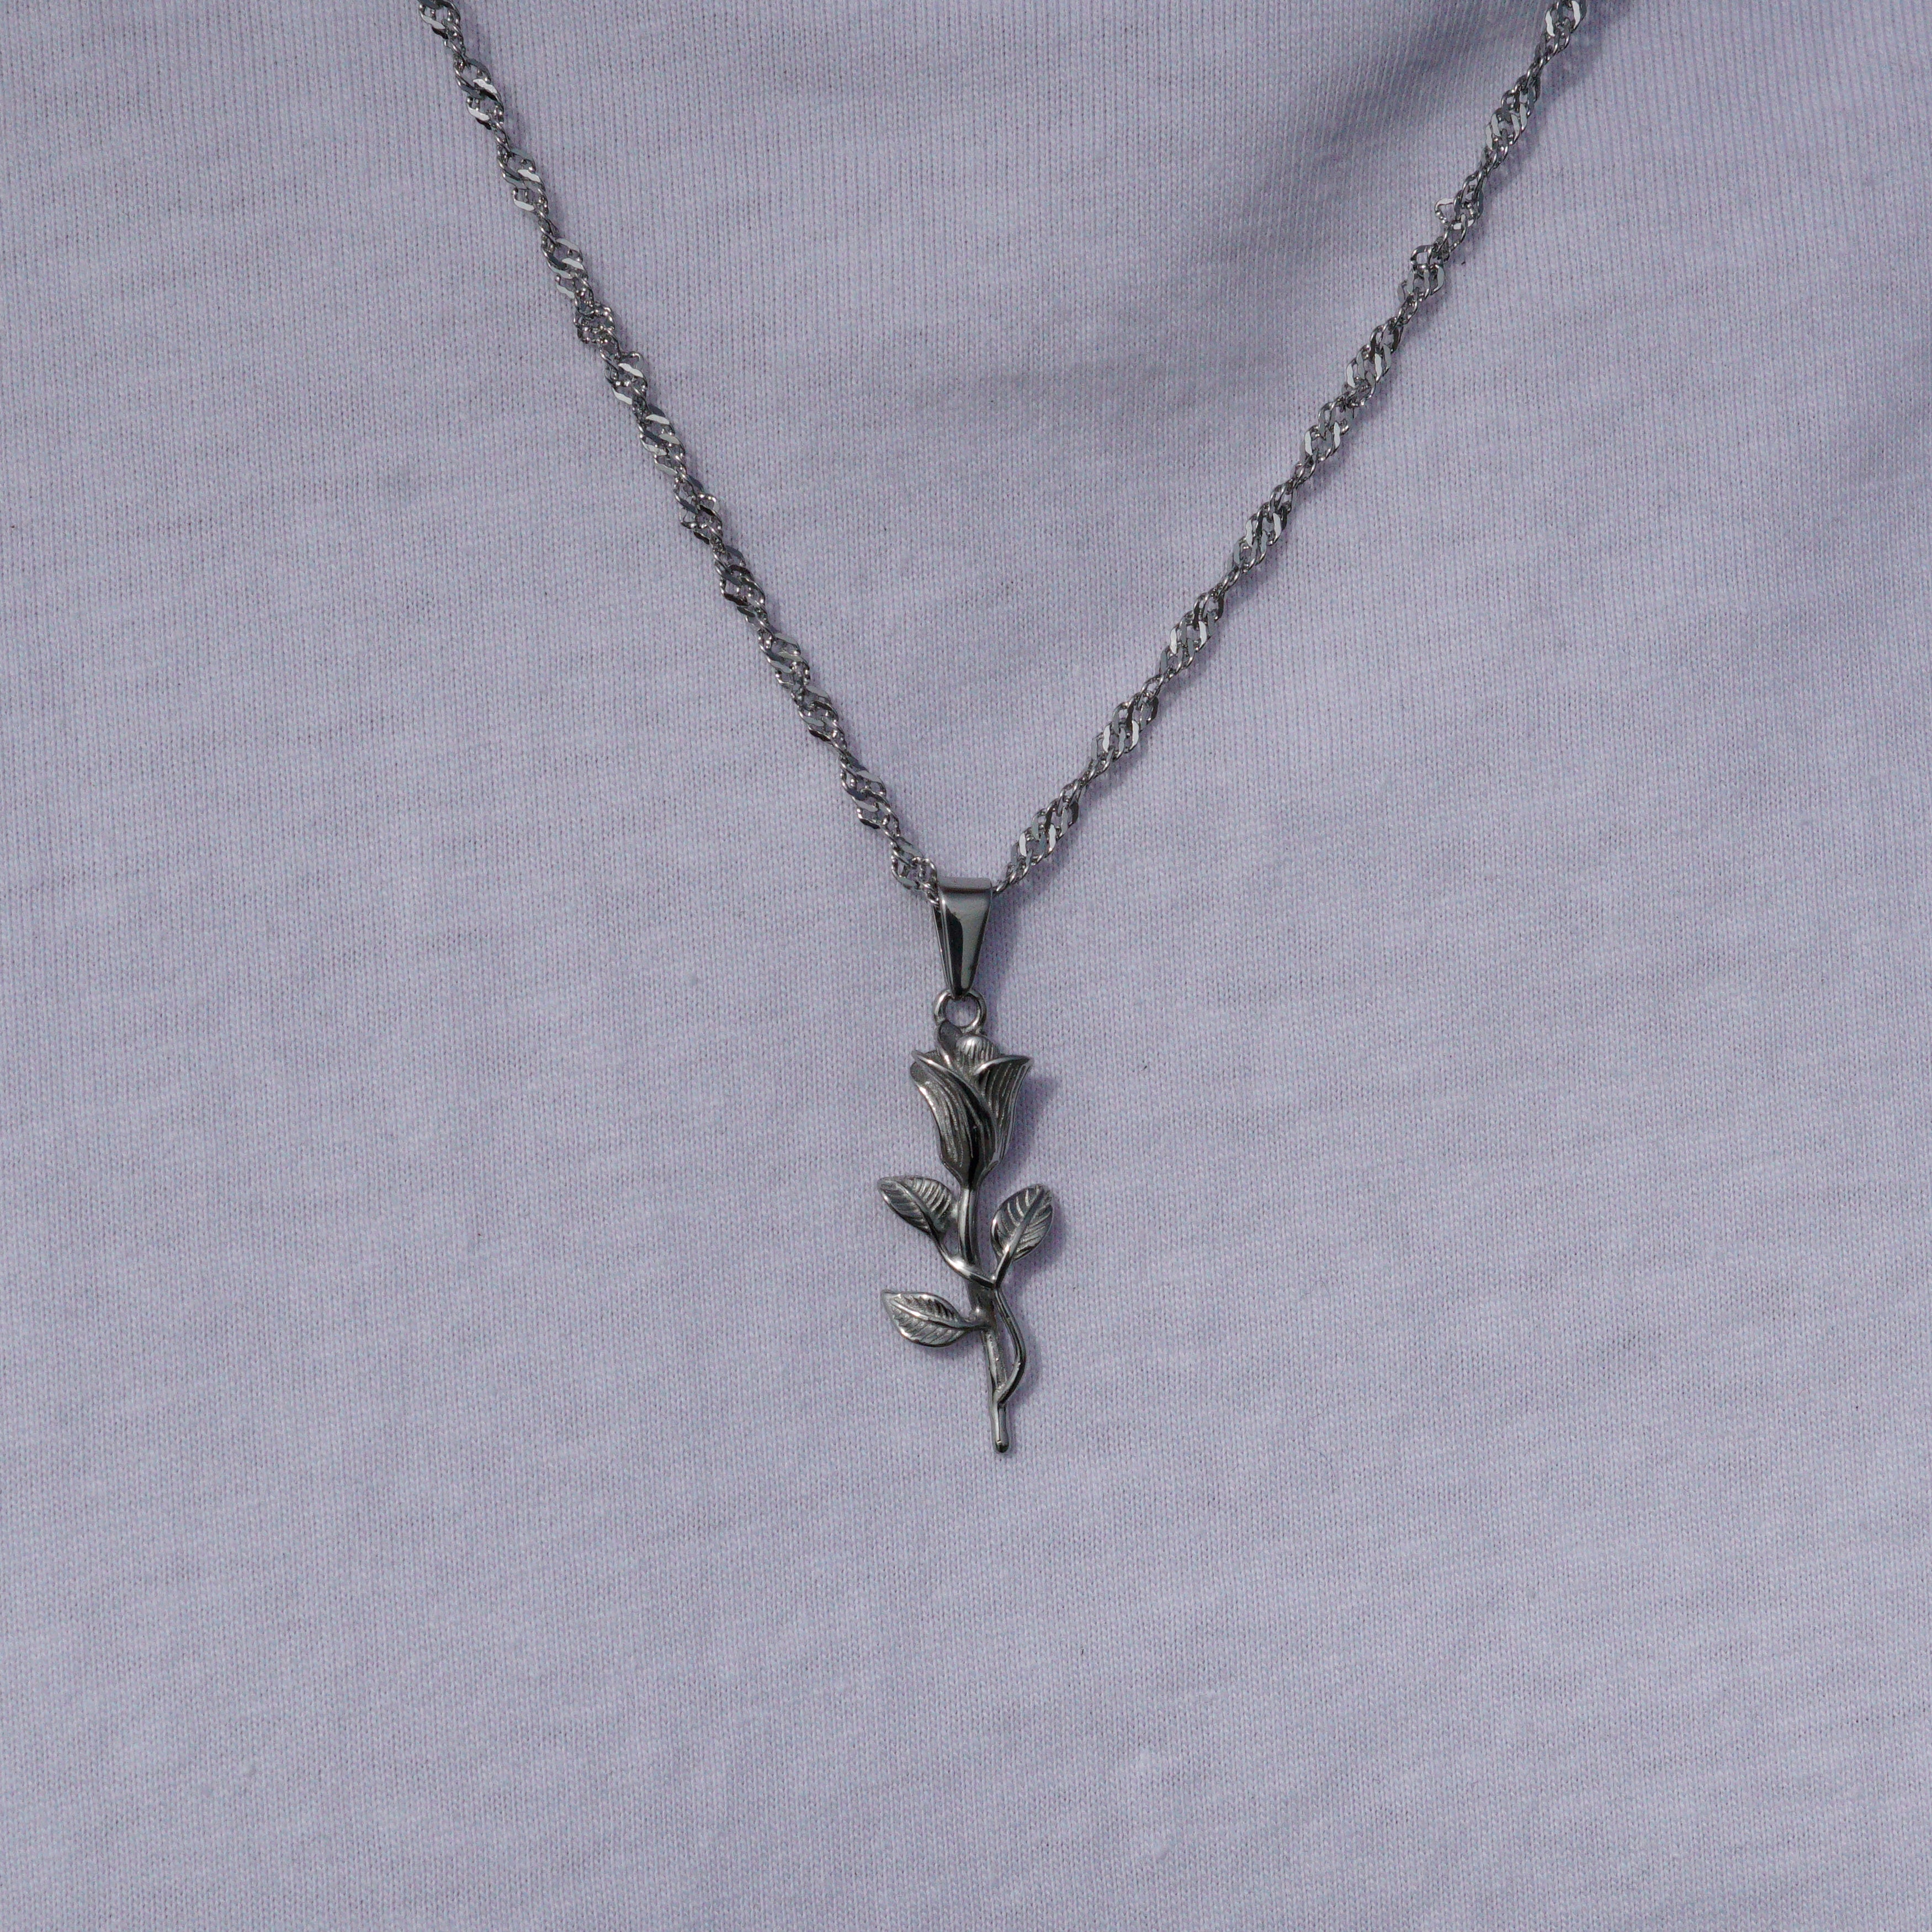 ROSE NECKLACE - SILVER TONE